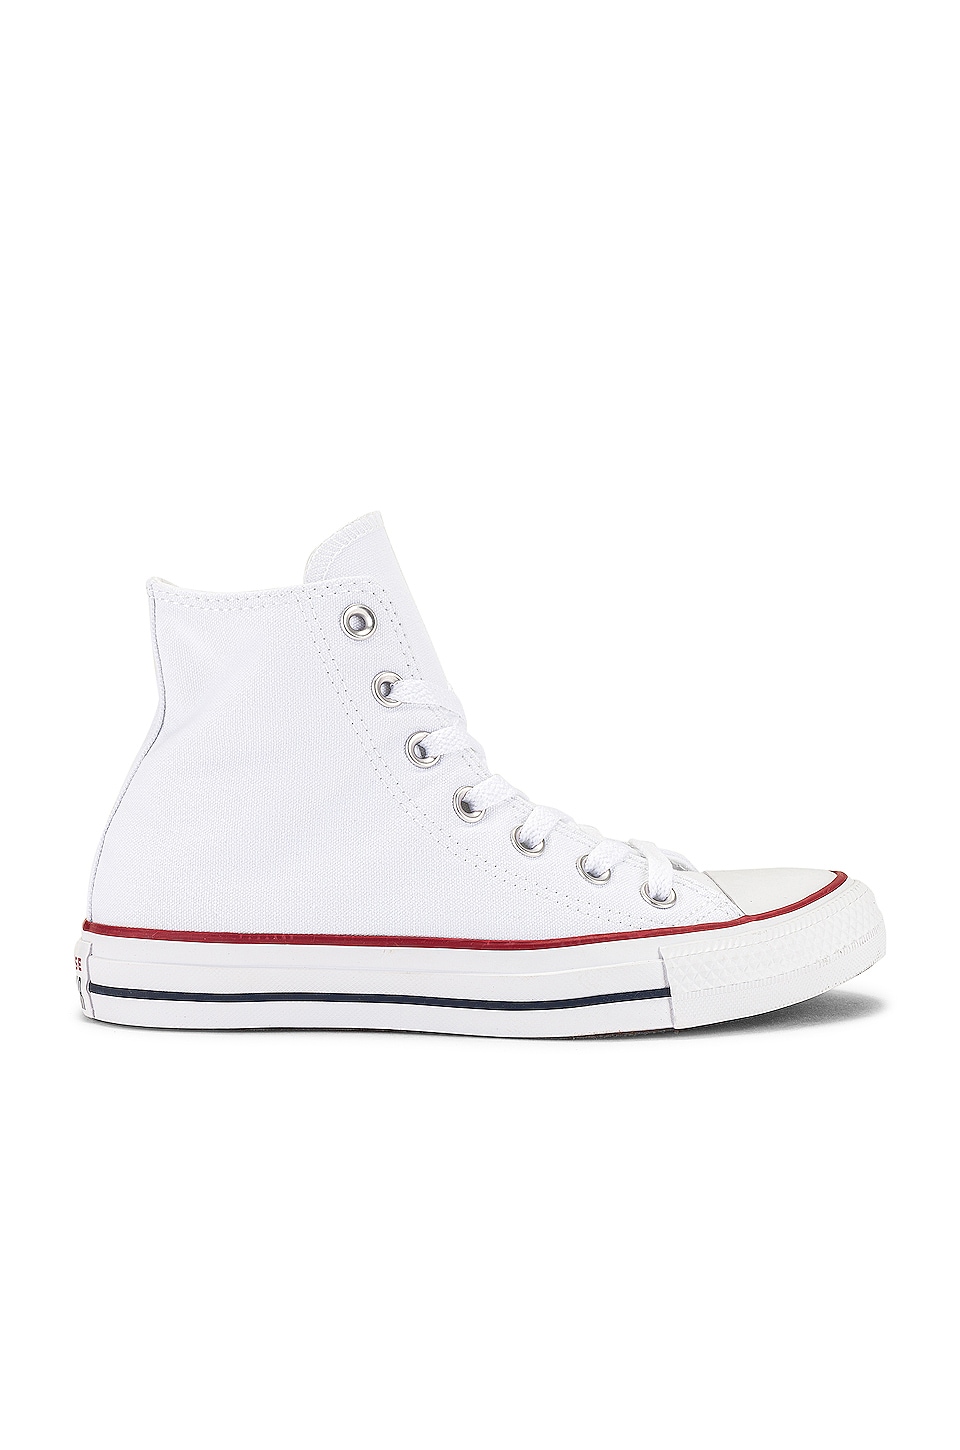 Converse Chuck Taylor All Star Sneaker in Optical White | REVOLVE